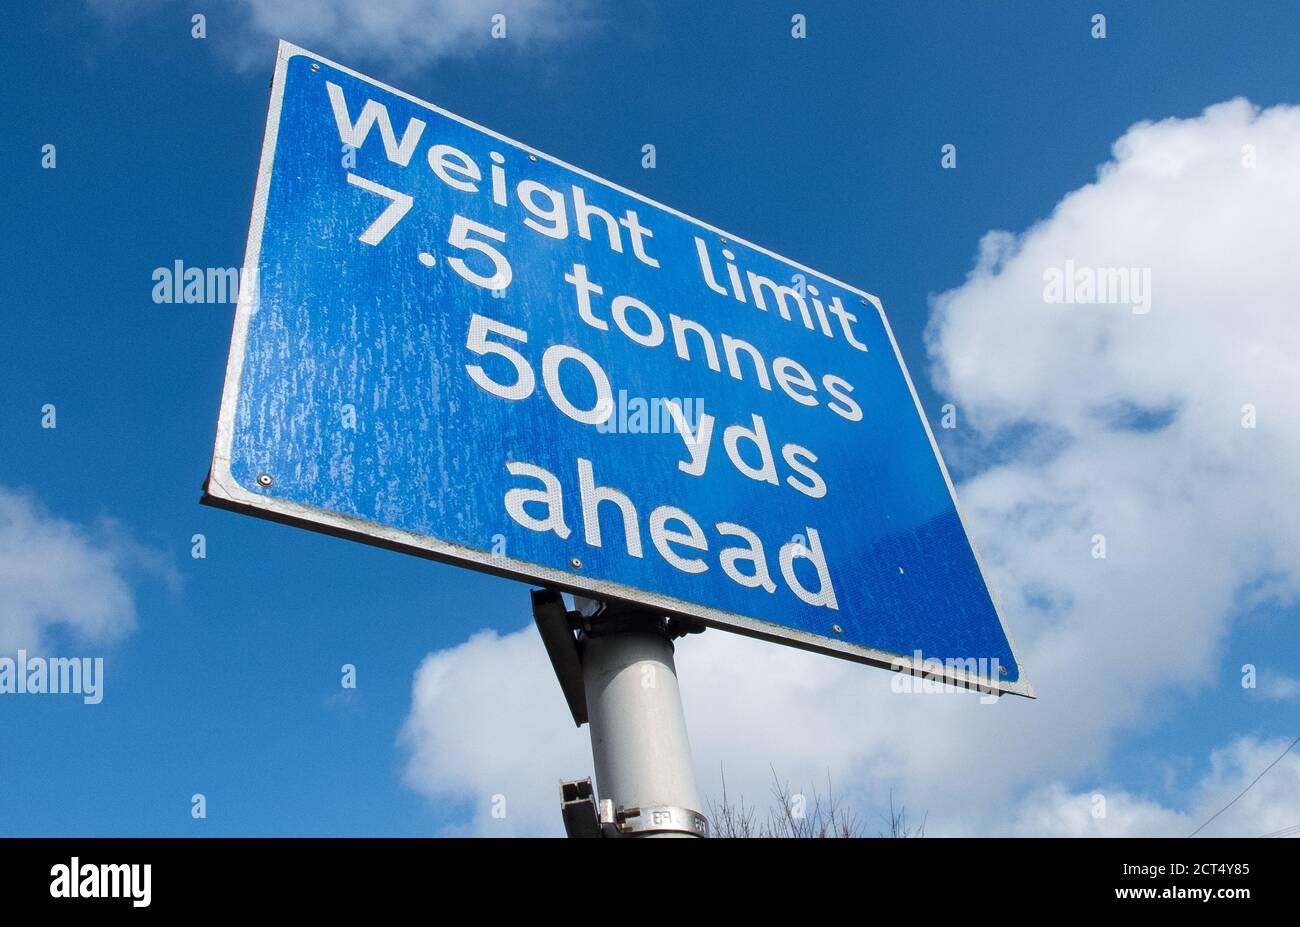 Road sign indicating that there is a weight limit of 7.5 tonnes 50 yards ahead. 11 April 2013. Photo: Neil Turner Stock Photo